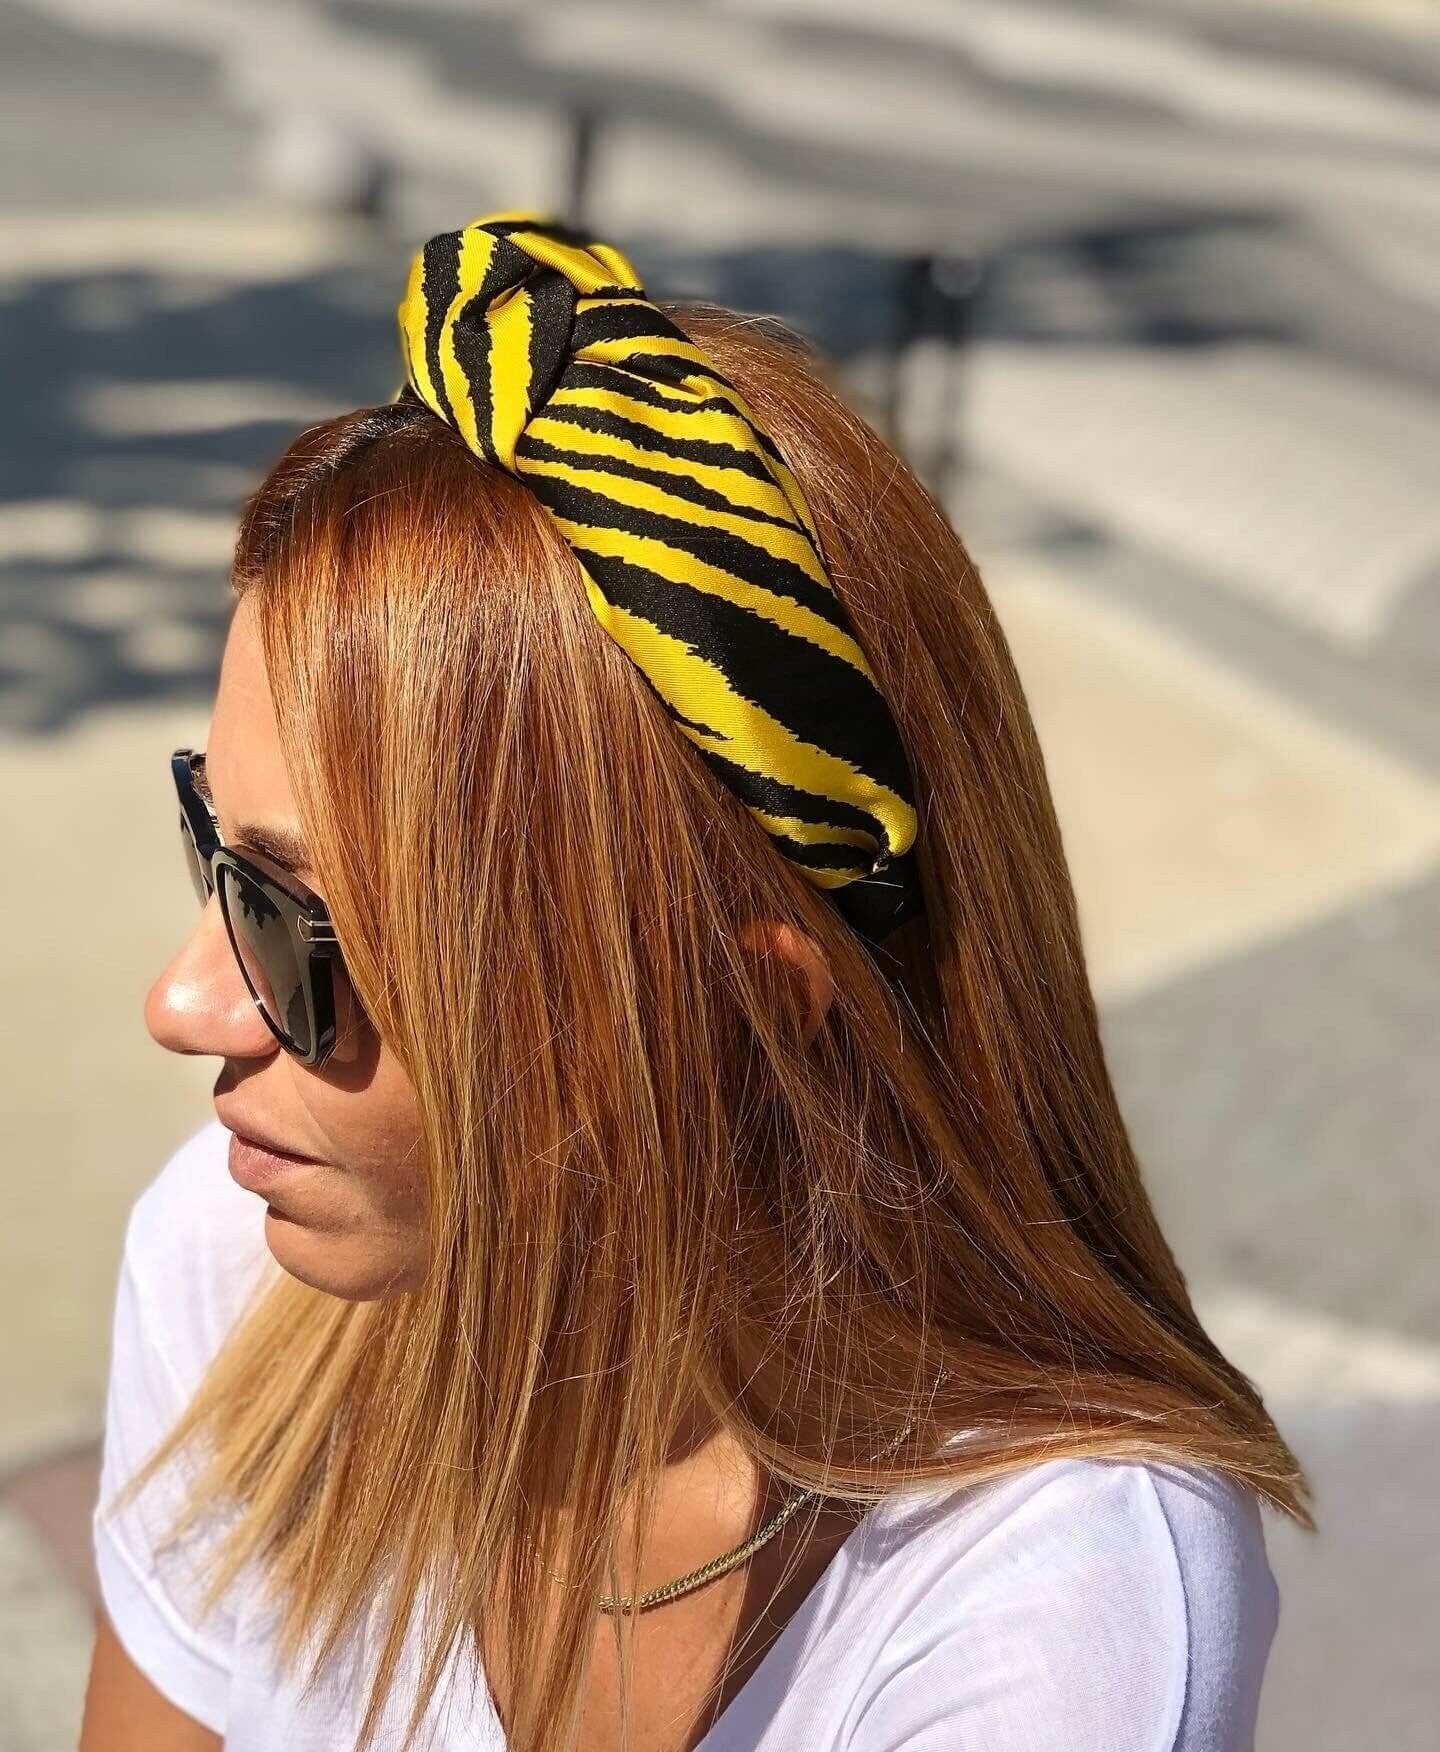 Elevate your accessory collection with this fashionable yellow and black zebra pattern knotted headband, crafted from soft material for ultimate comfort.